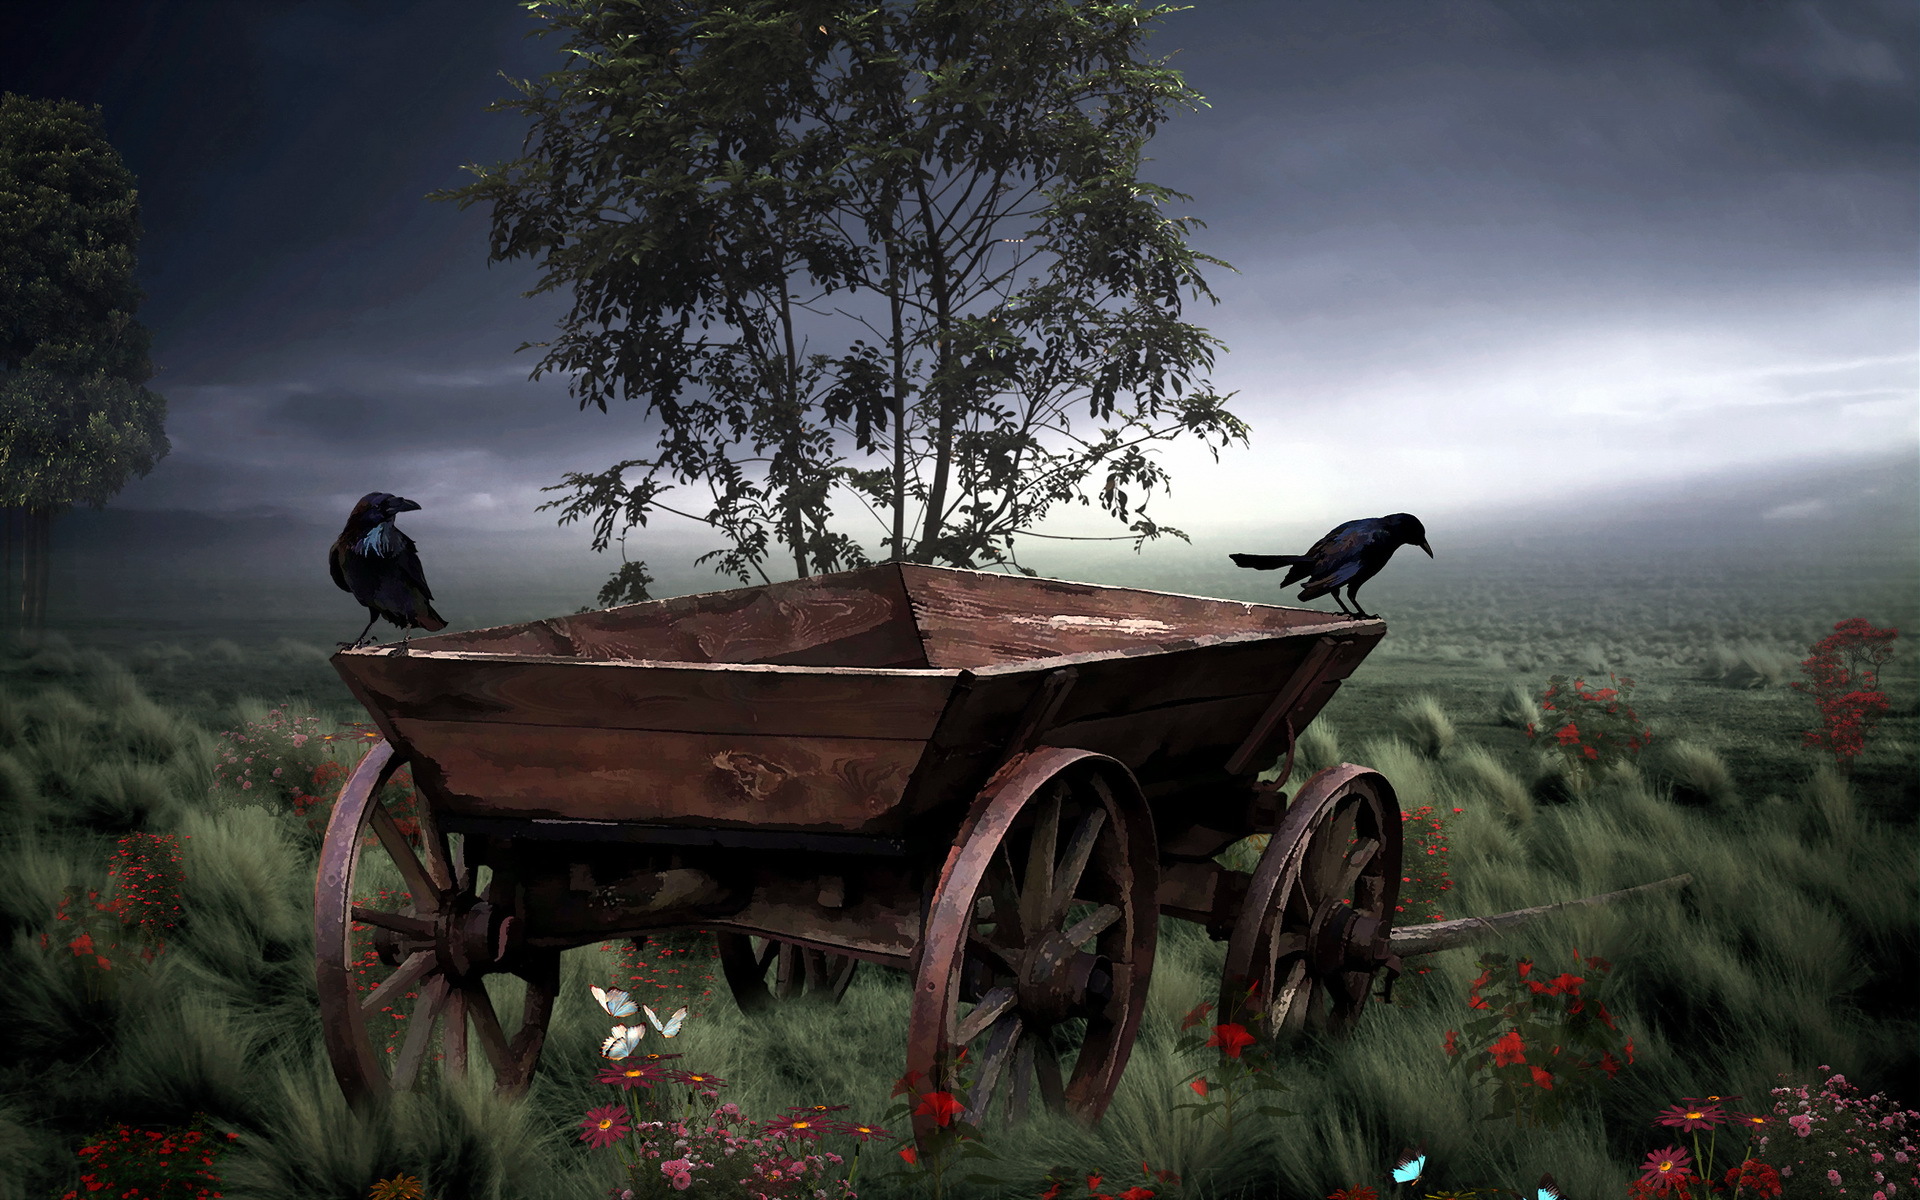 art, Painting, Vehicles, Wagon, Rustic, Landscapes, Flowers, Sky, Trees, Birds, Crow, Raven, Mood Wallpaper